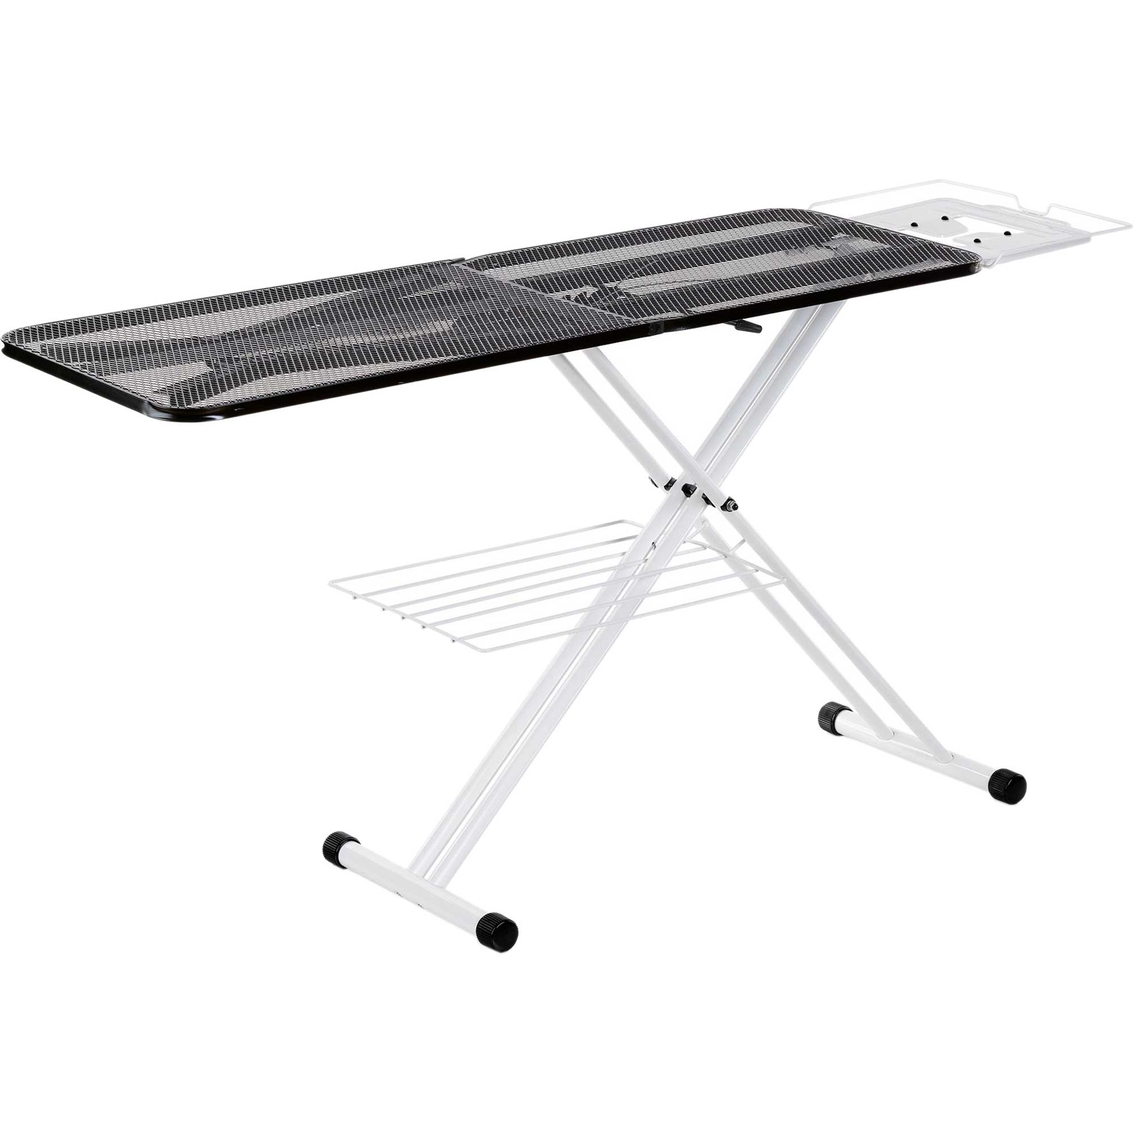 Reliable The Board 320 lb. 2 in 1 Ironing Board with Verafoam Cover Set - Image 3 of 6